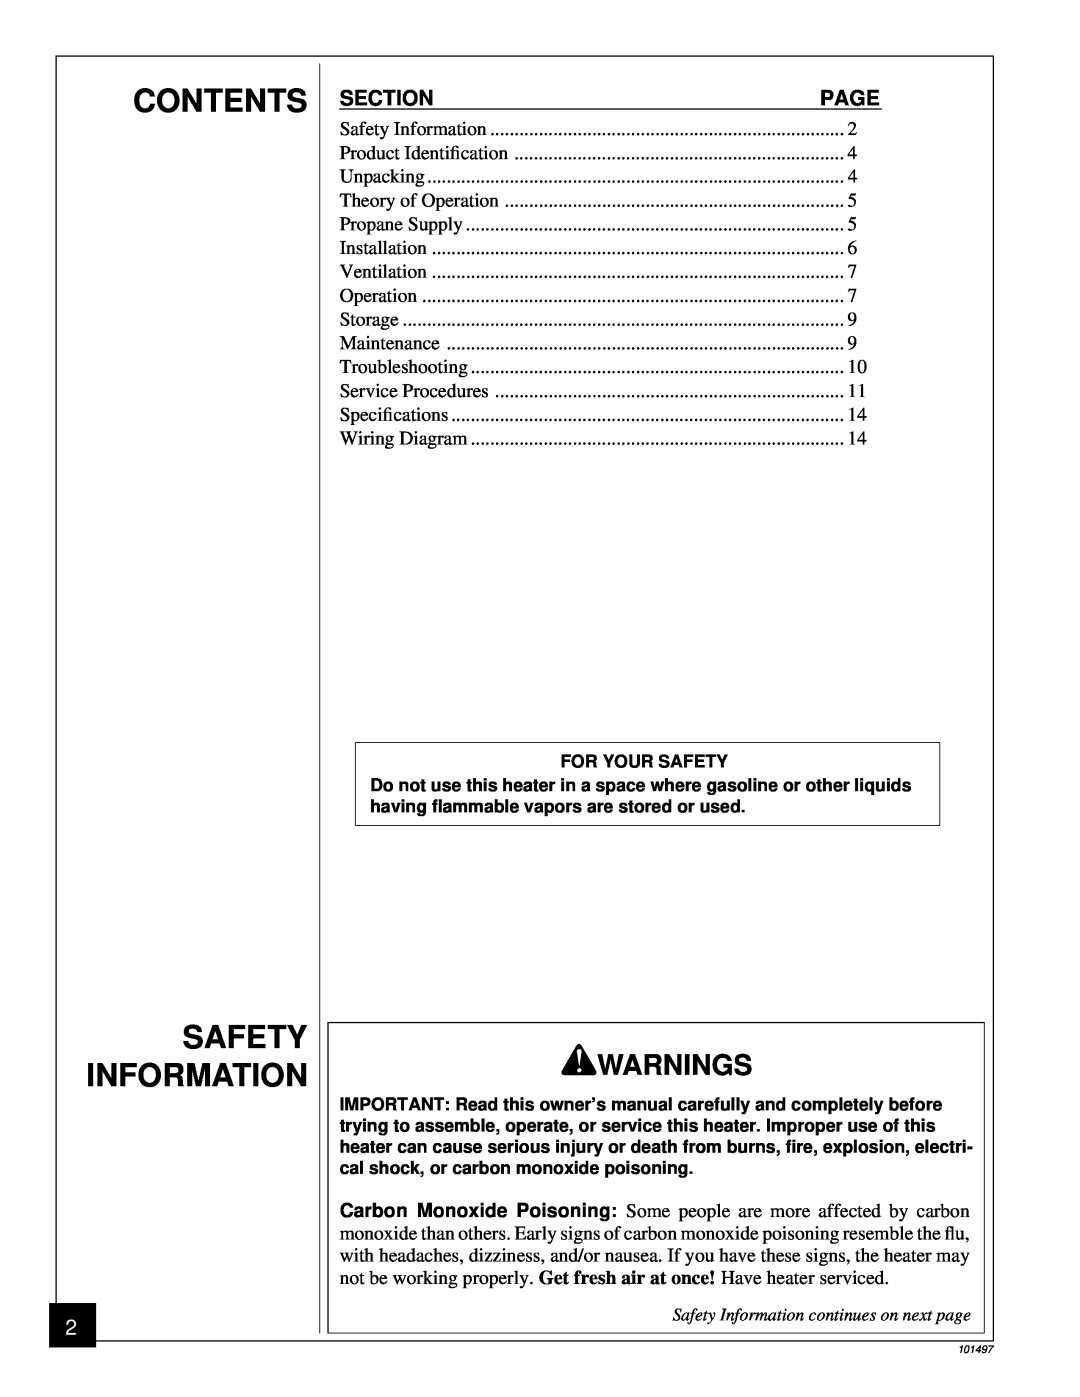 Homelite HHC50LP owner manual Contents Safety Information, Warnings 